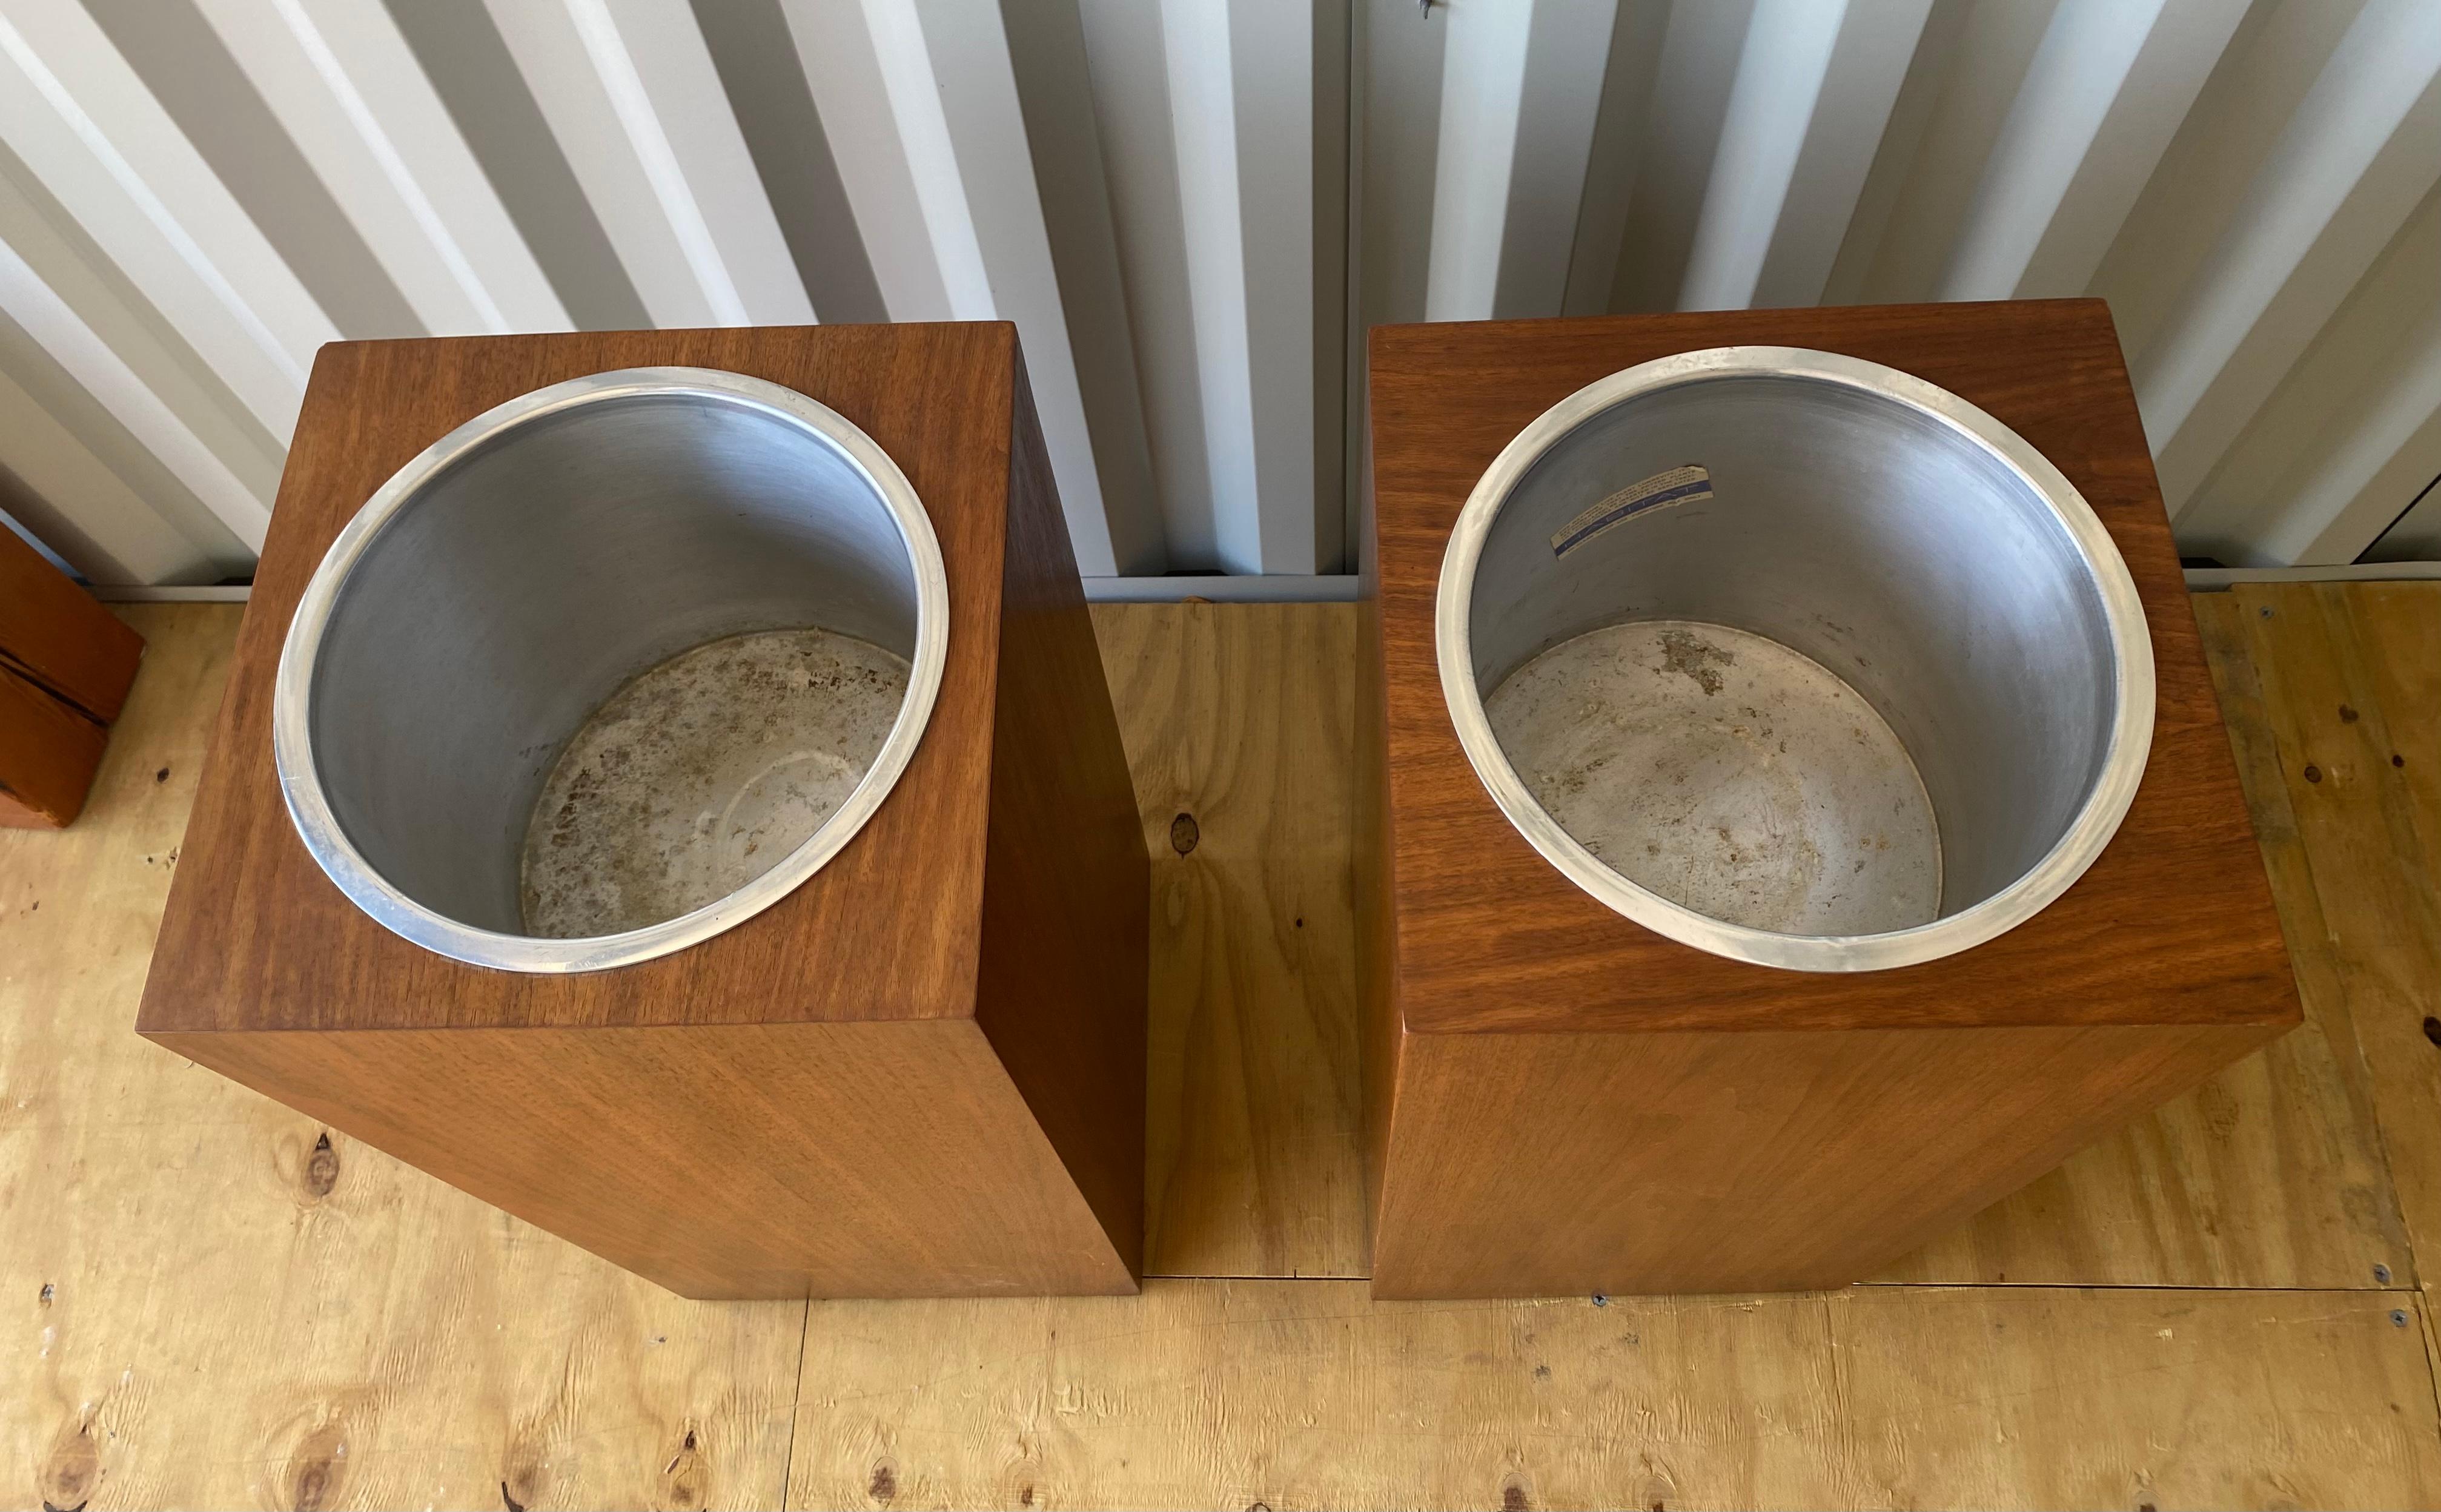 Modernist Walnut and Aluminum Architectural Planters by Habitat International,, Stunning sleek, simple ,classic design,Fit seamlessly into any modern, contemporary, environment.Priced separately but would be amazing used as a pair.